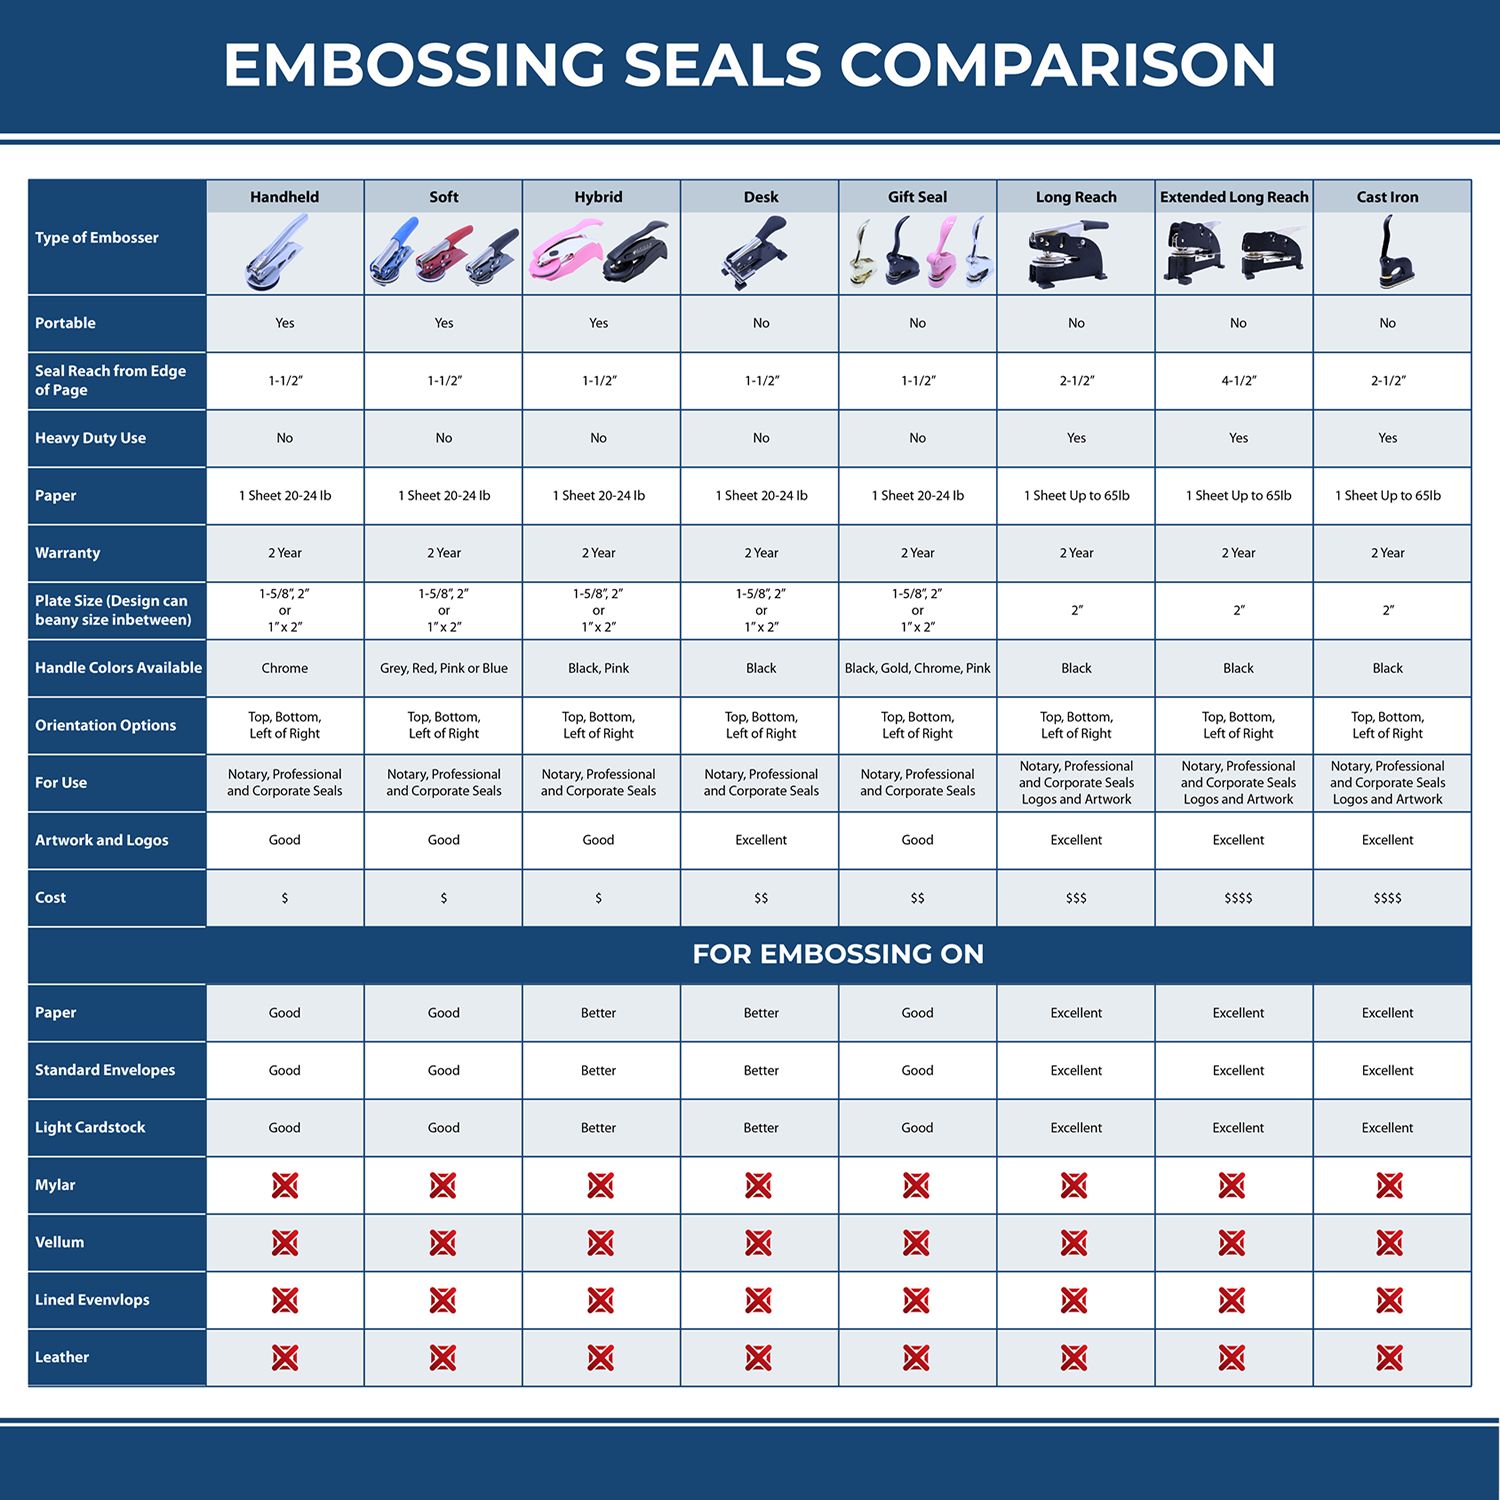 A comparison chart for the different types of mount models available for the Heavy Duty Connecticut Landscape Architect Cast Iron Embosser.